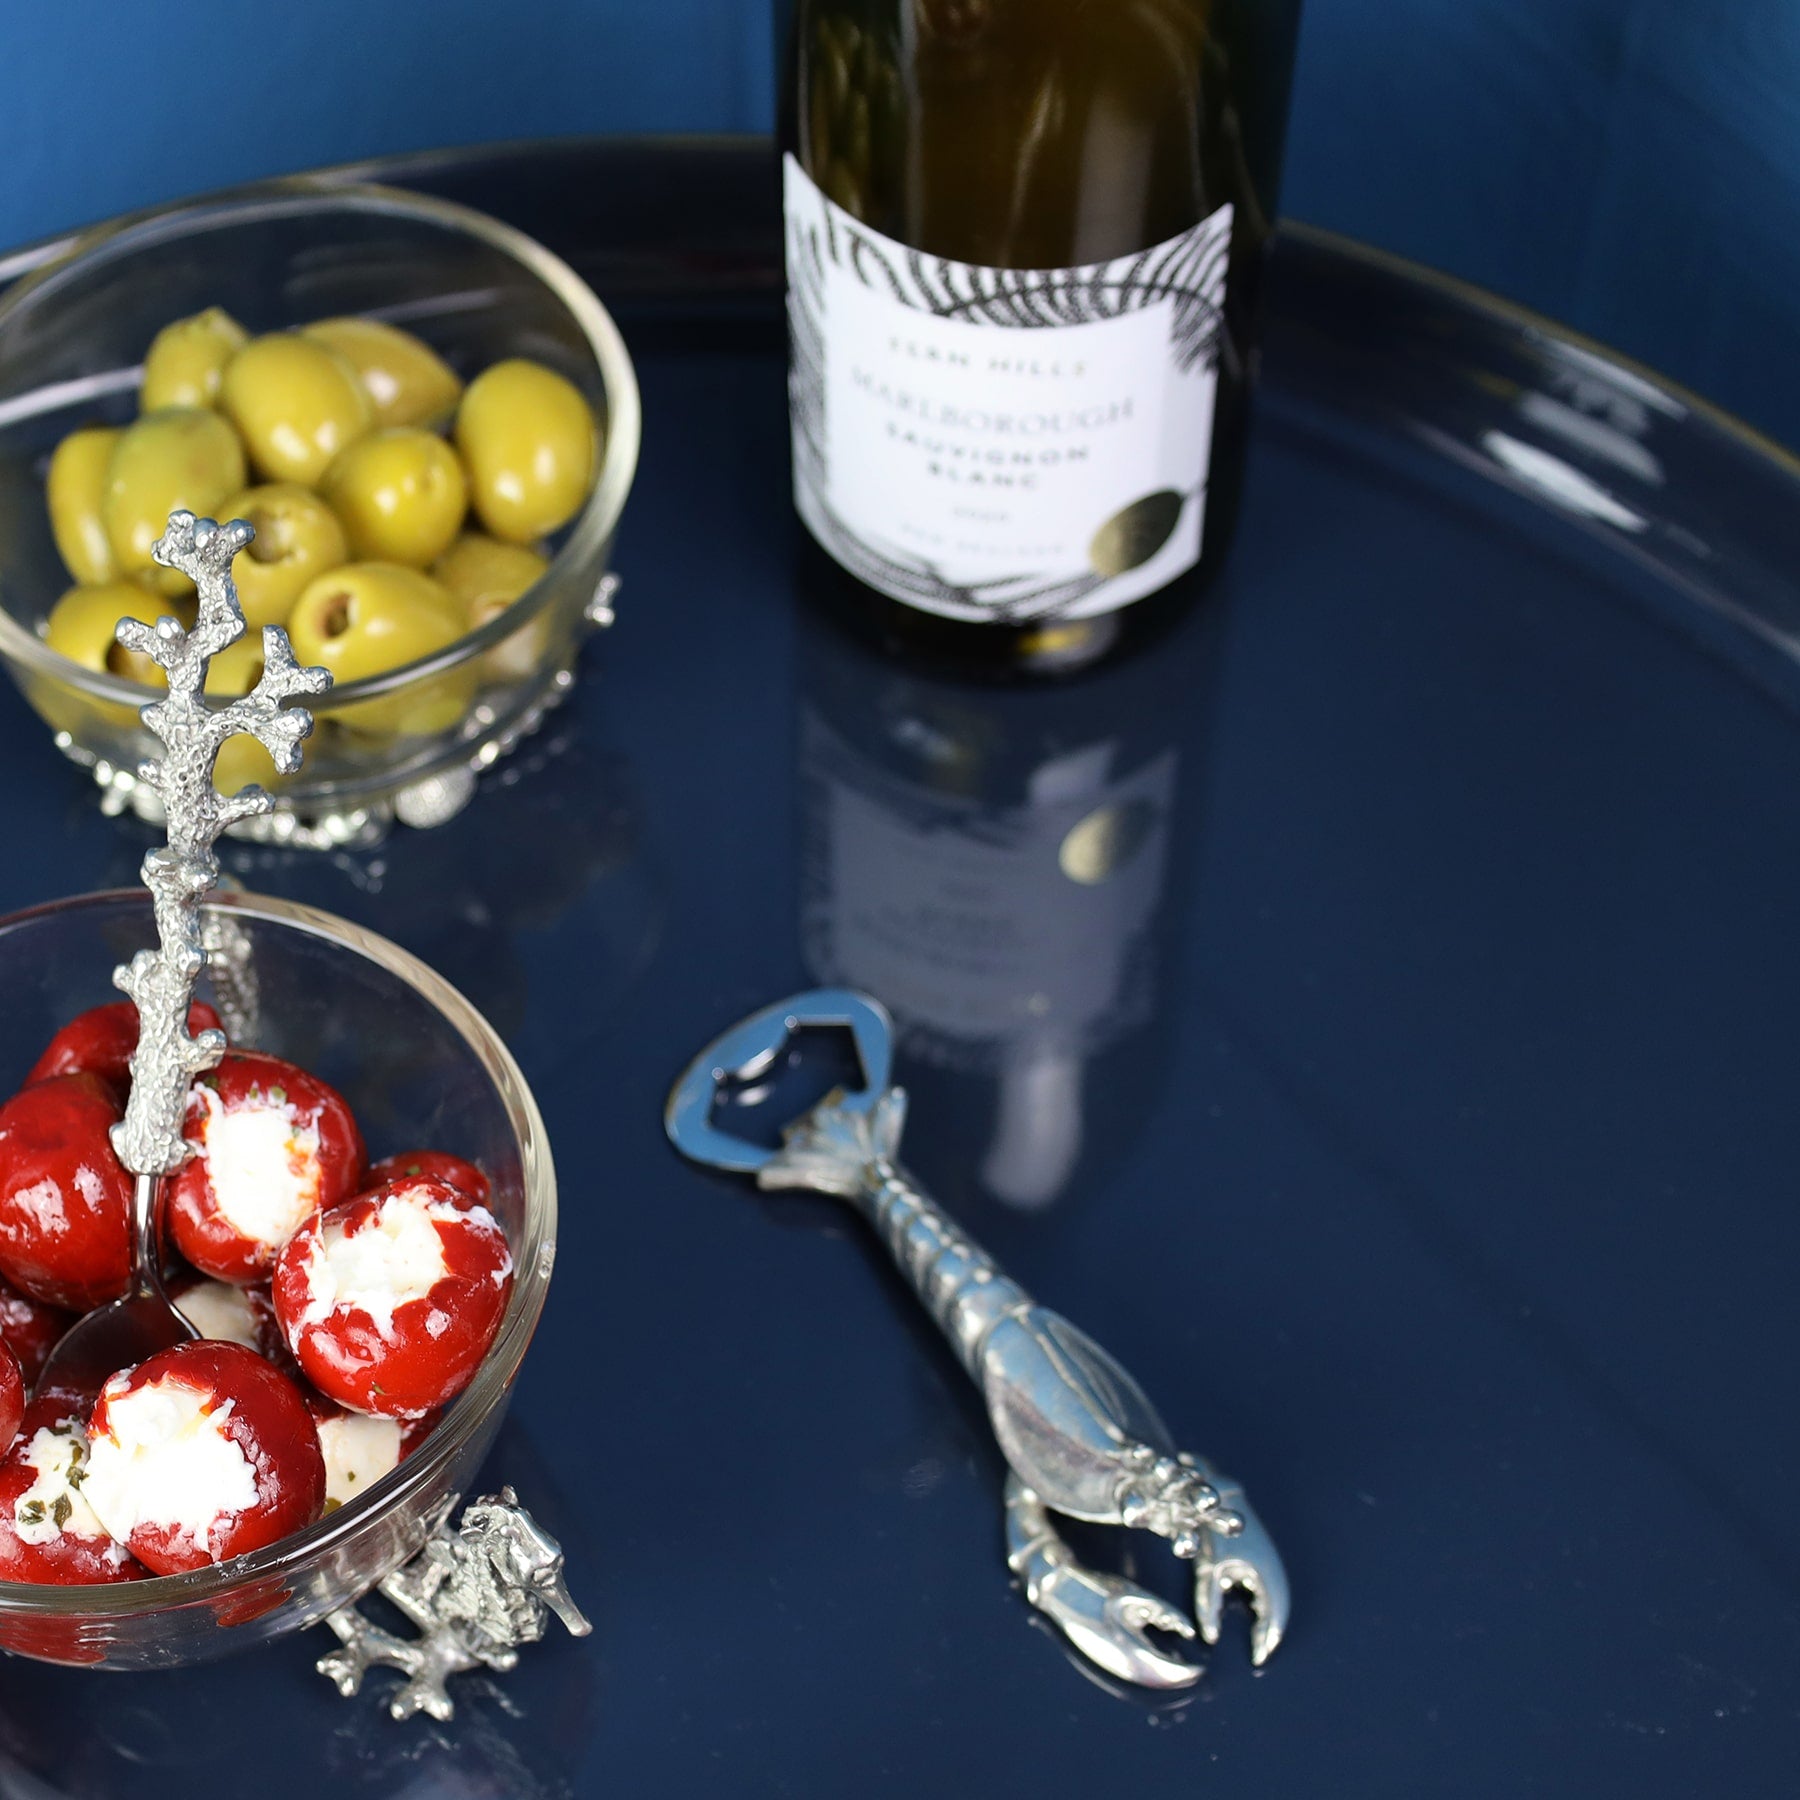 Pewter Lobster shaped Bottle Opener placed on a table with other pewter items on the table and a wine bottle in the background